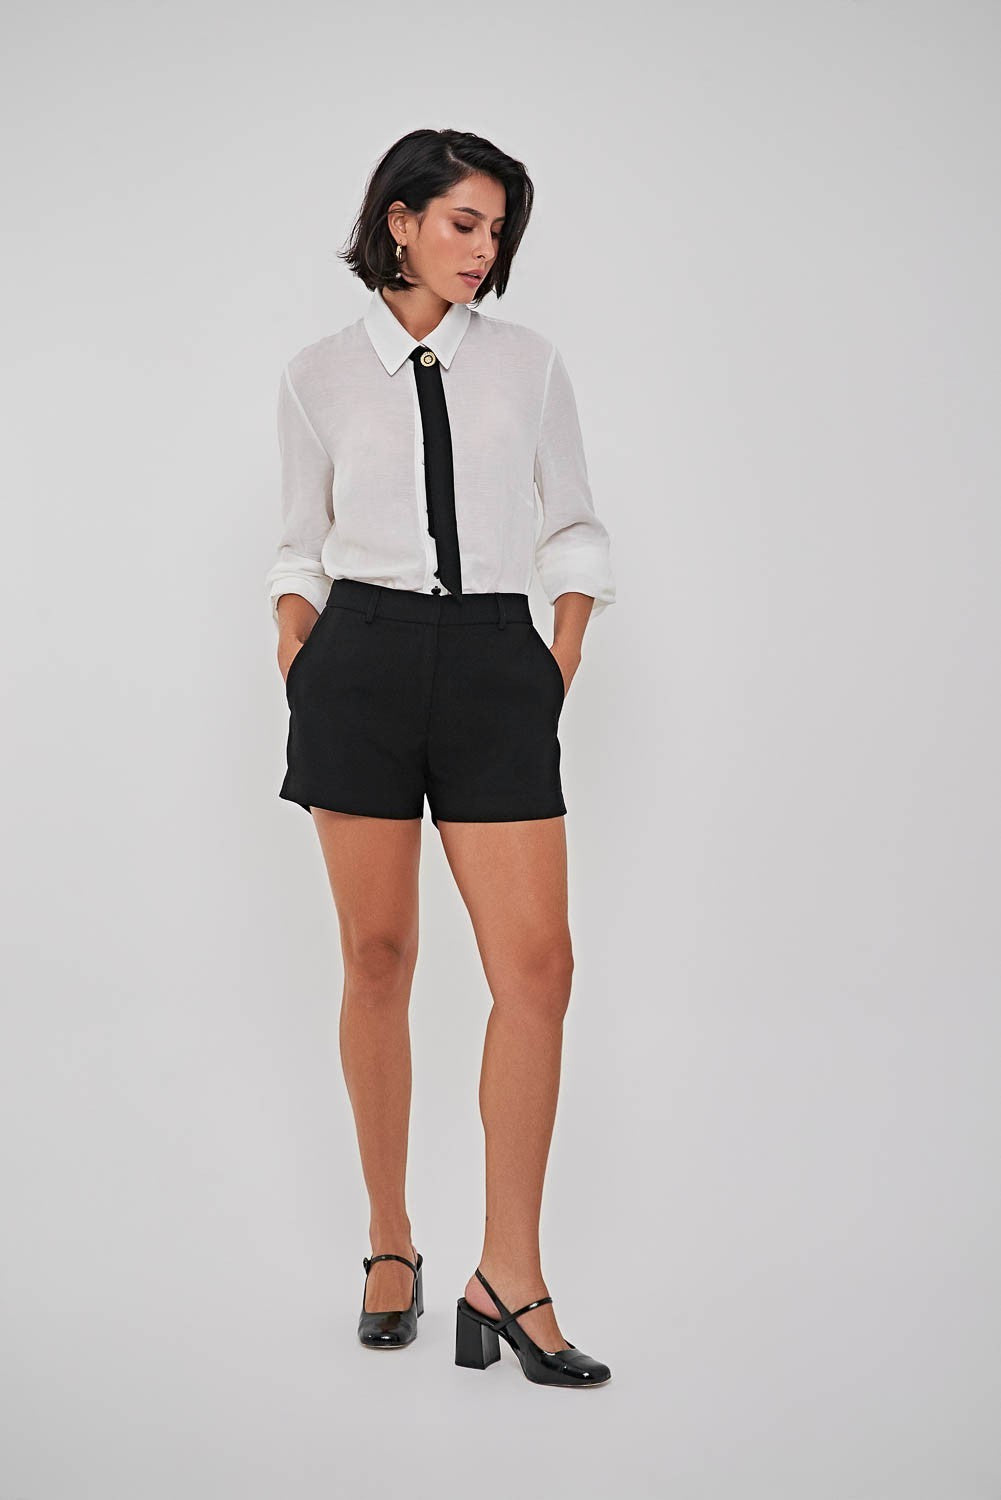 SHORTS HOLLY PRETO - BEGE